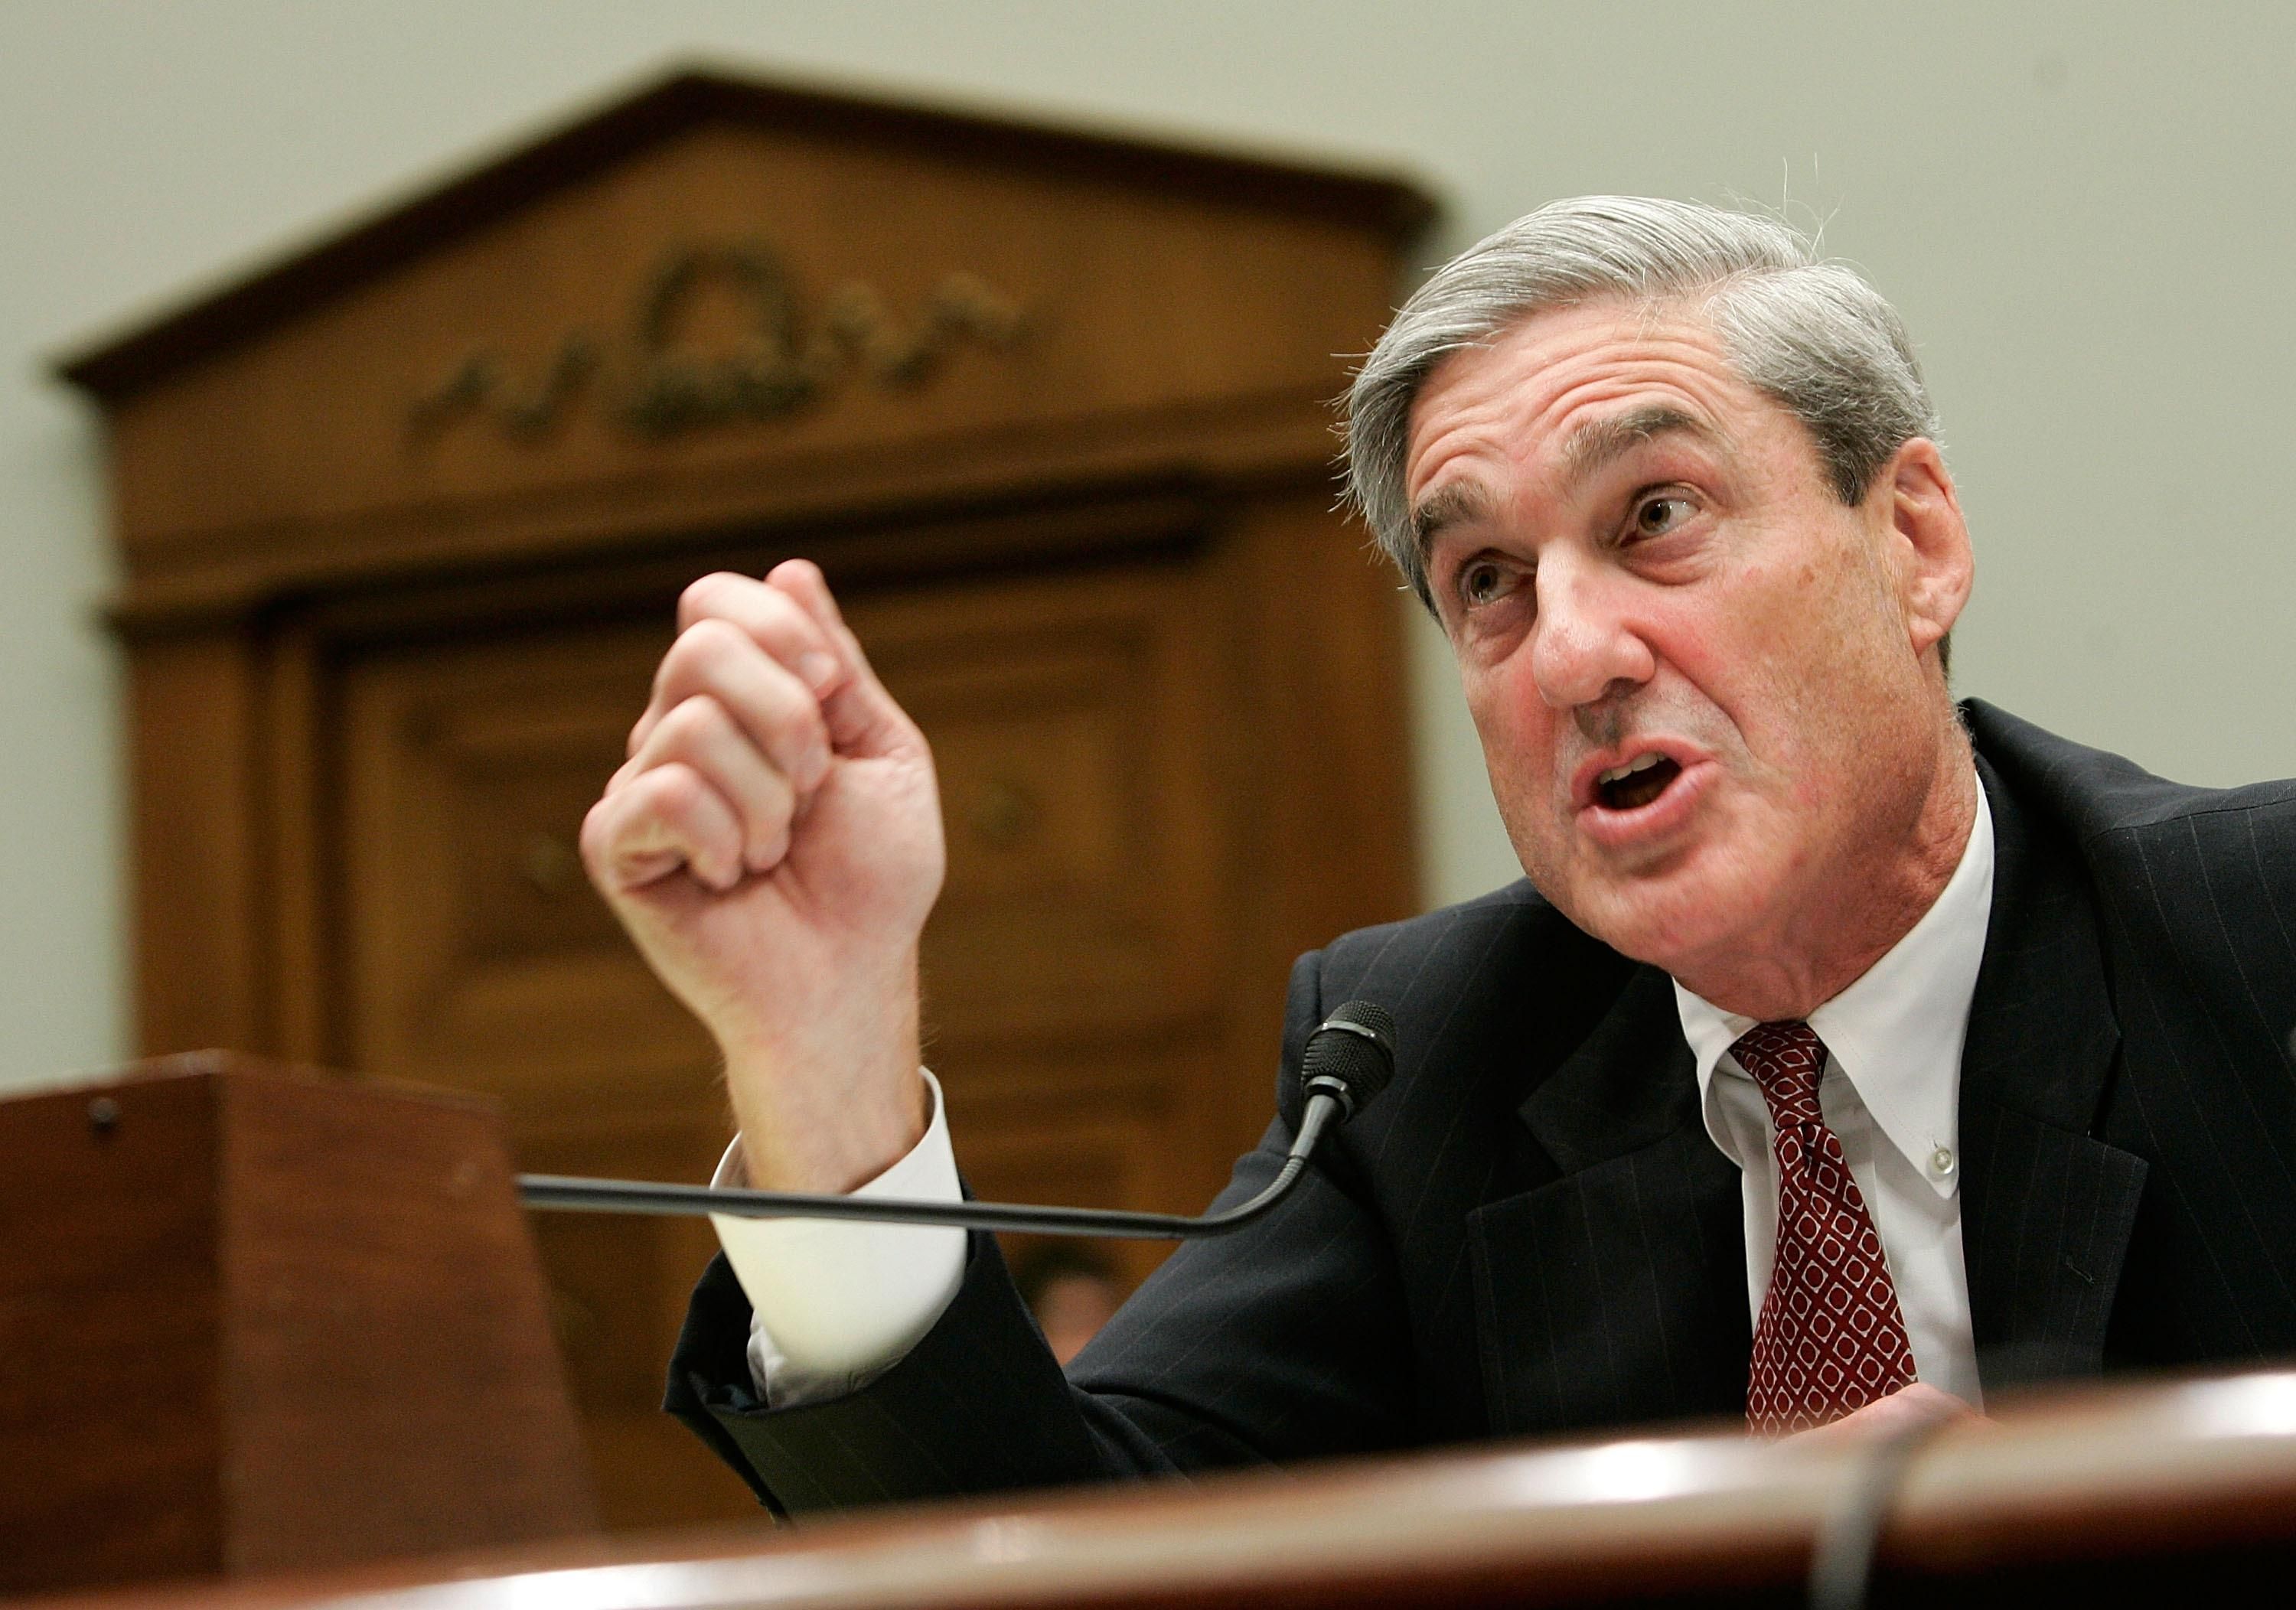 "The Mueller team is not going away." (Photo: Alex Wong/Getty Images)